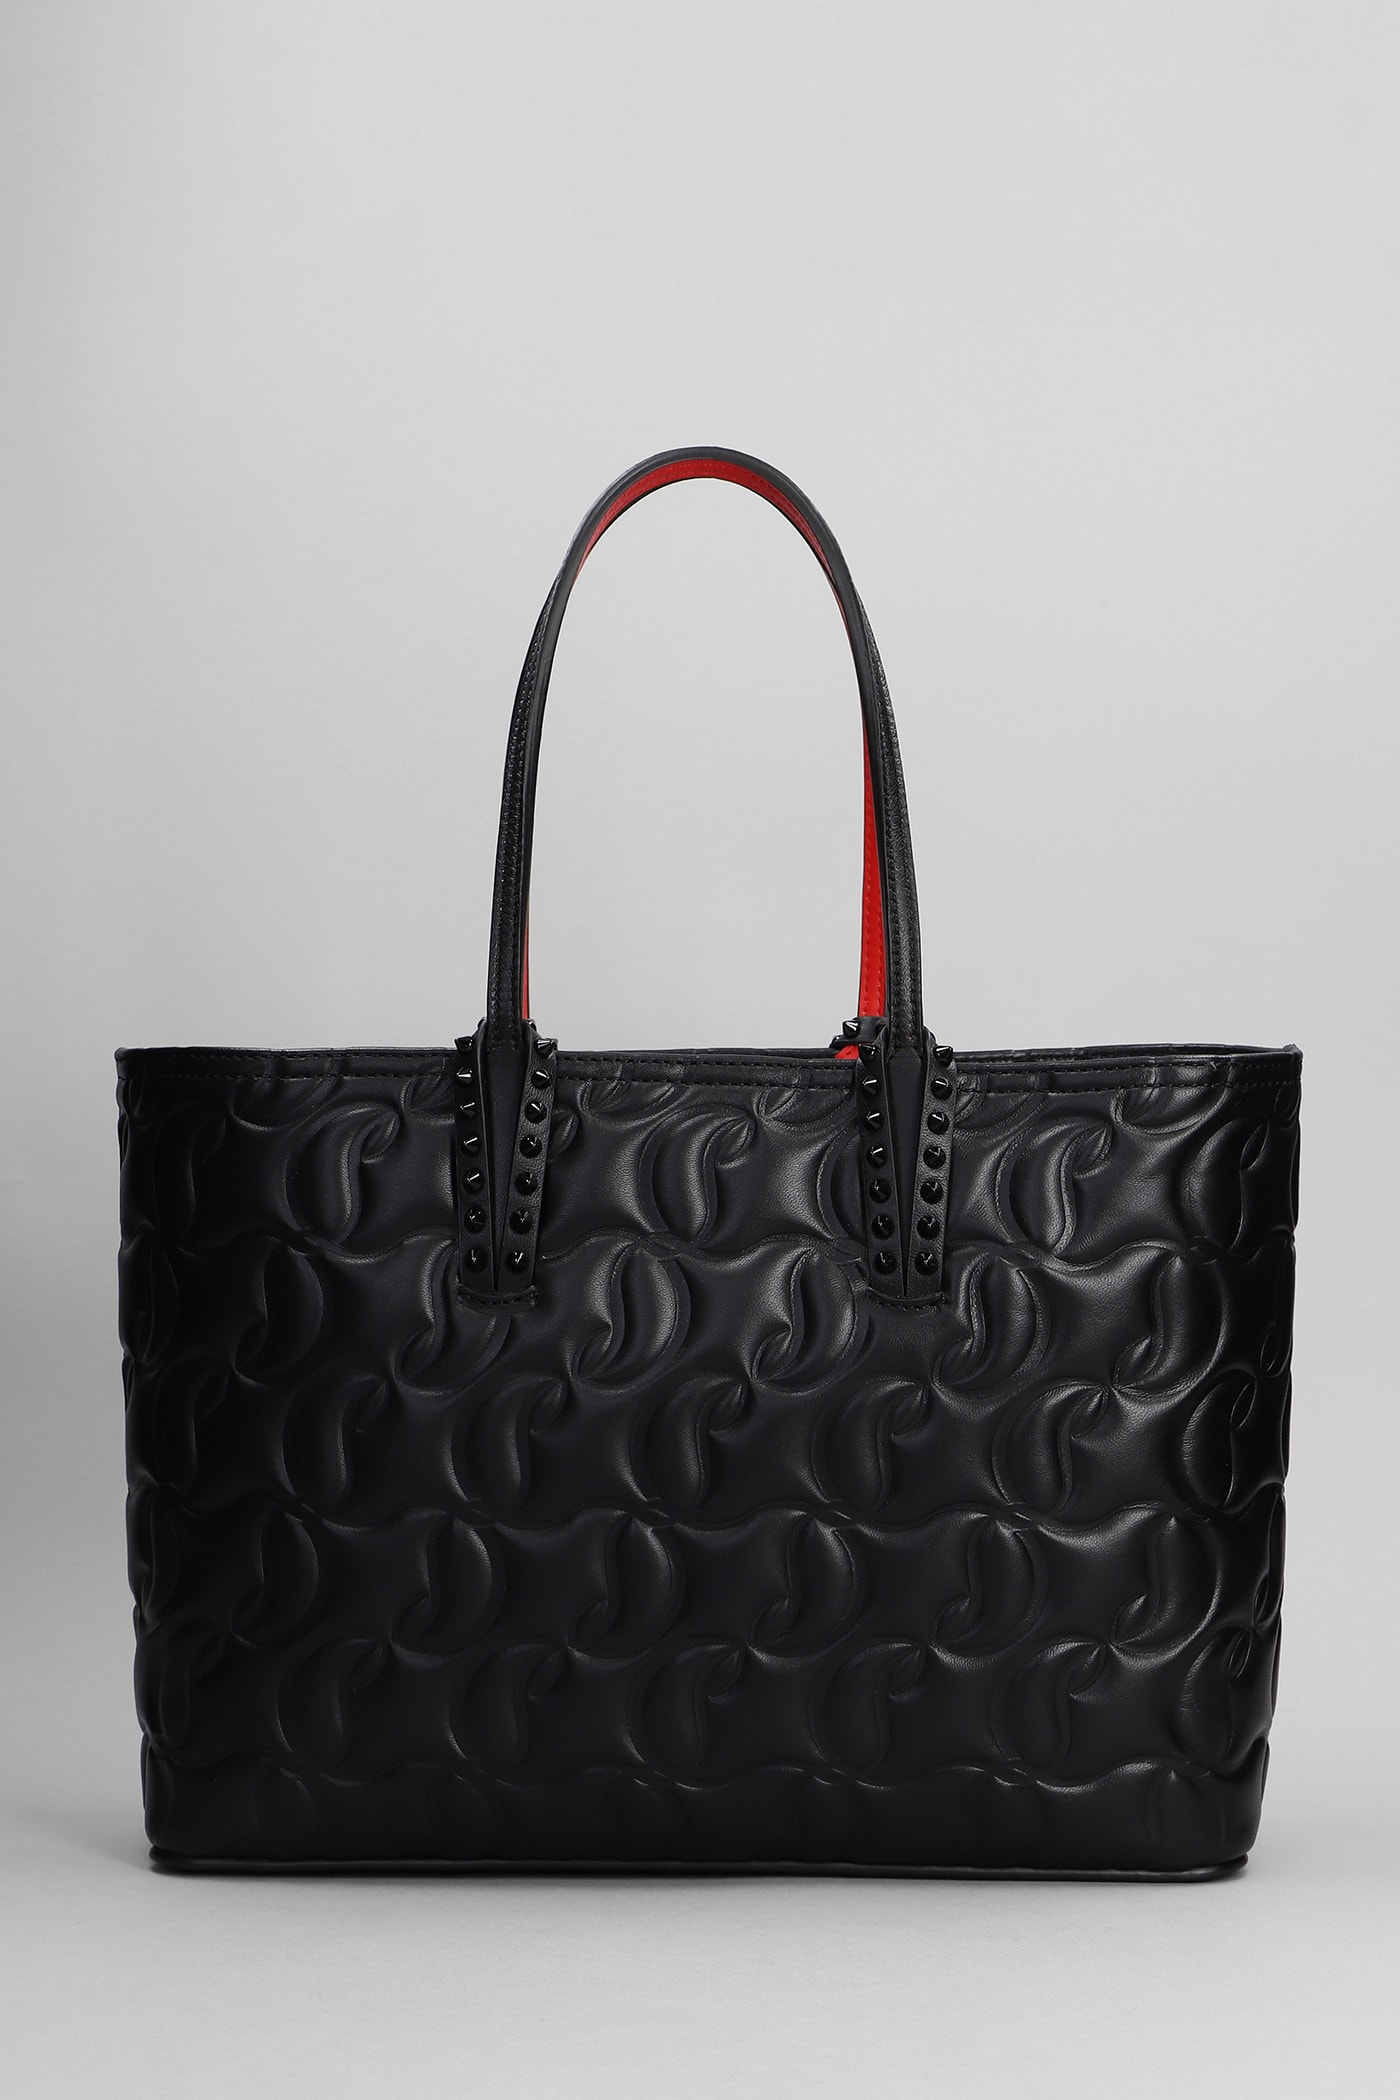 Christian Louboutin Cabata Small Tote In Black Leather